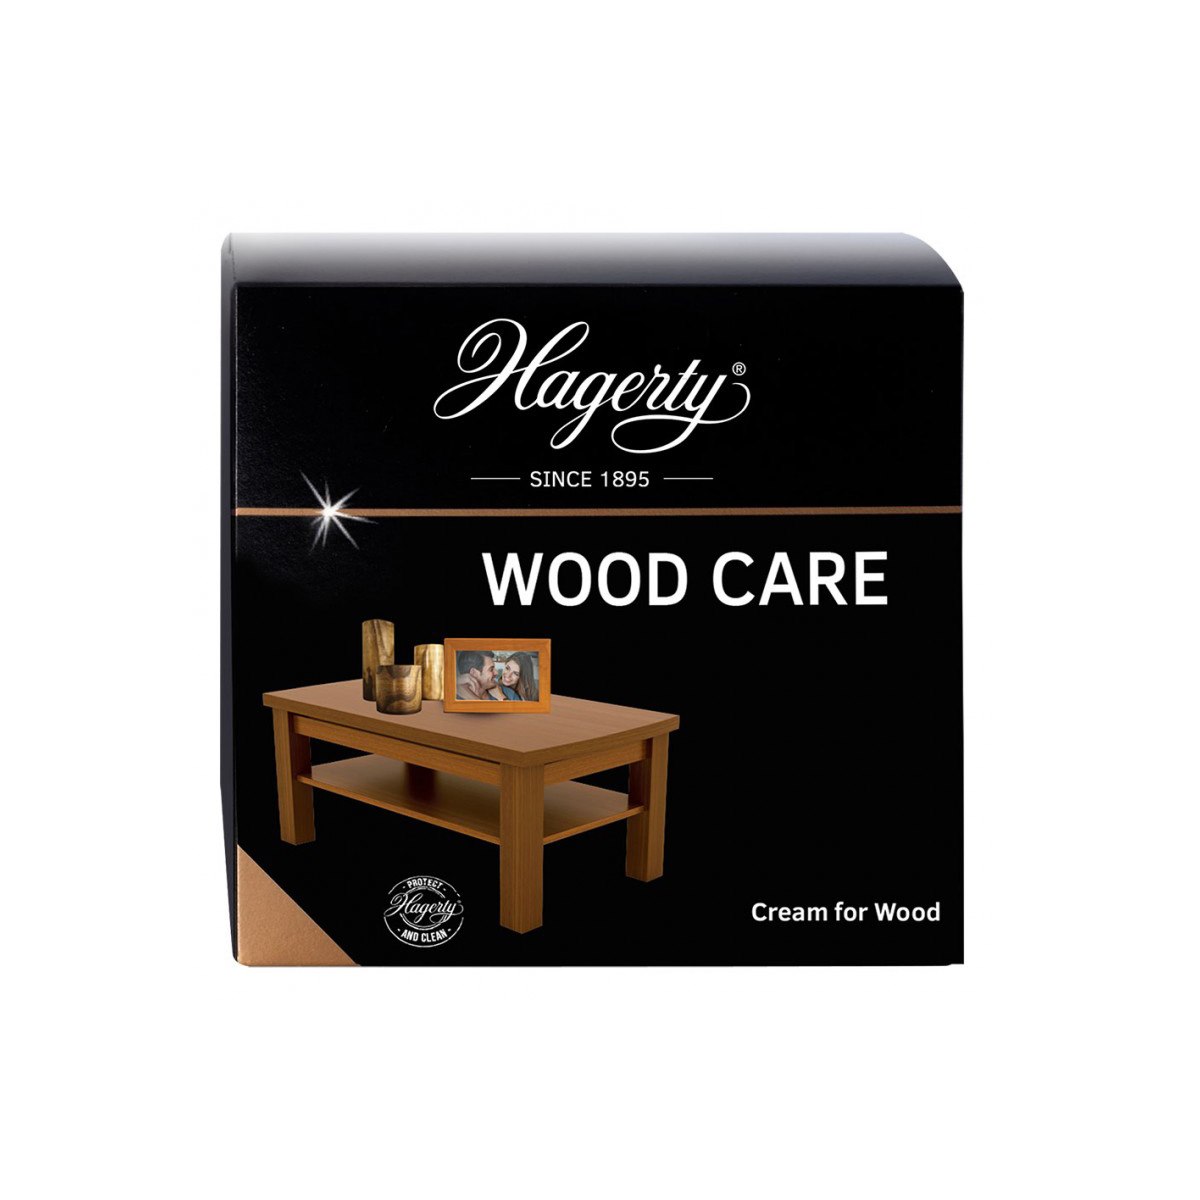 Hagerty Wood Care Cream for Wood